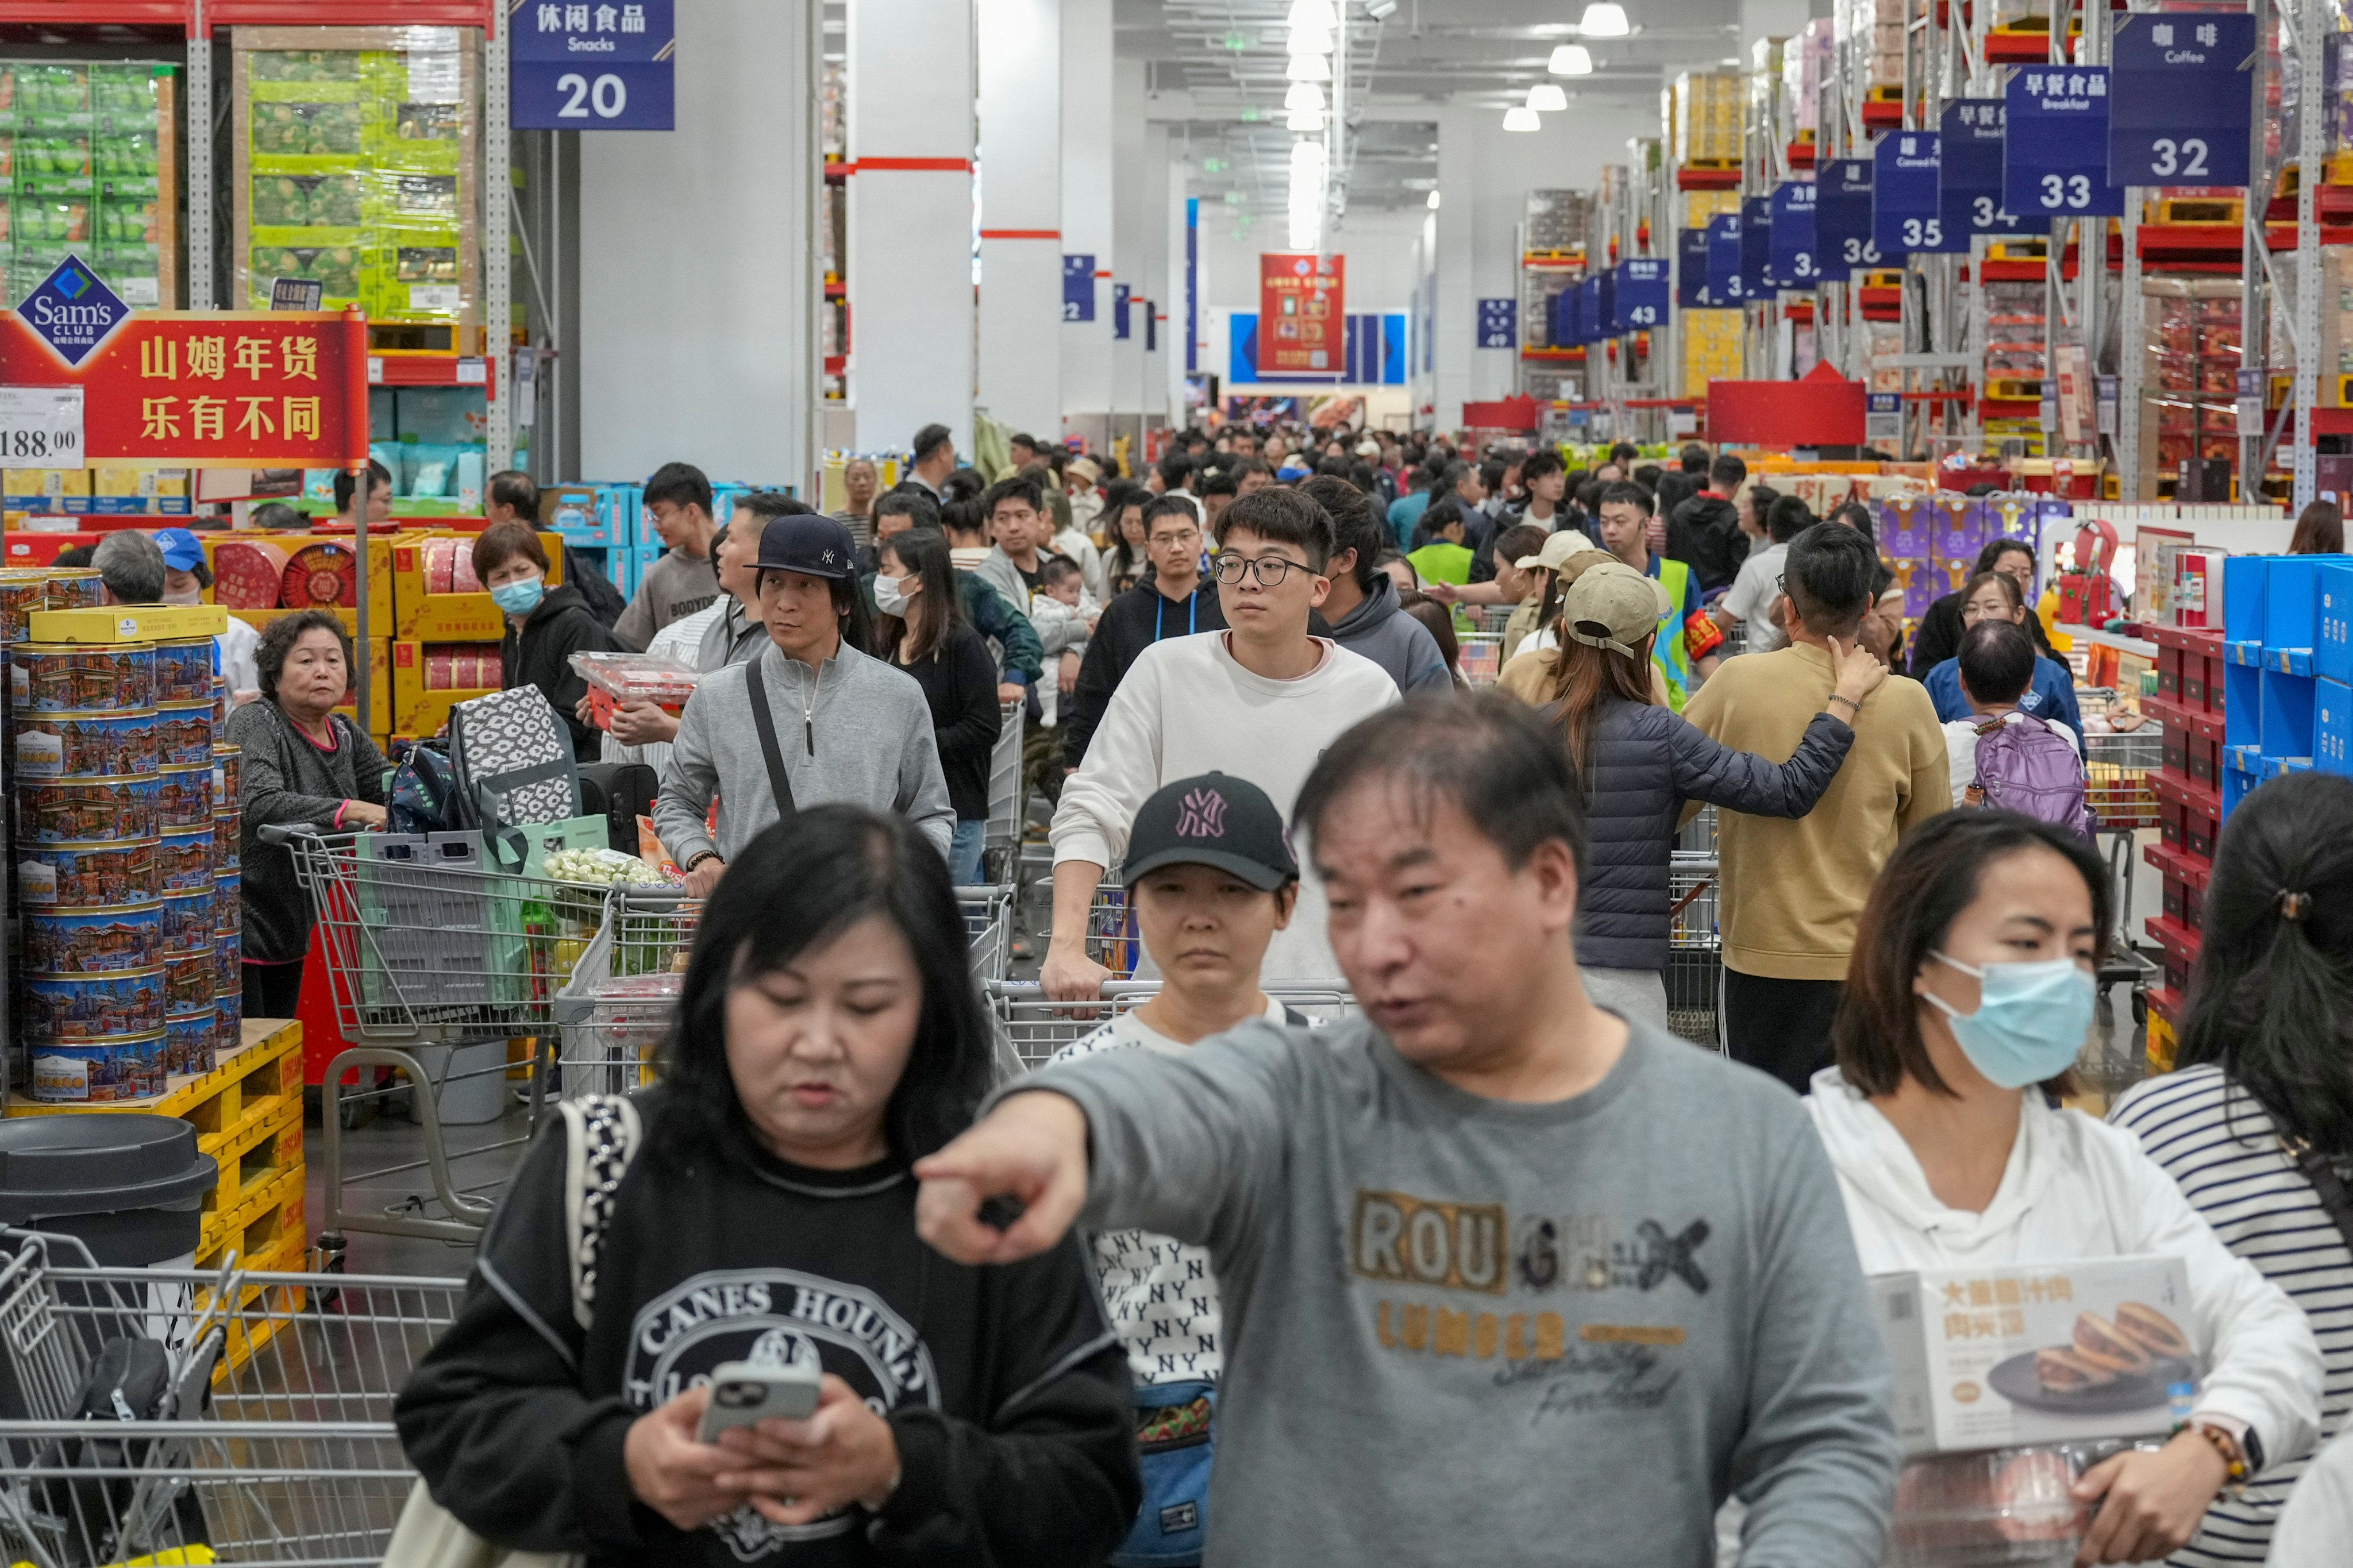 Shoppers from Hong Kong flock to a Sam’s Club store in Qianhai, Shenzhen. Hongkongers have been heading north to shop in mainland China megastores. Photo: Eugene Lee